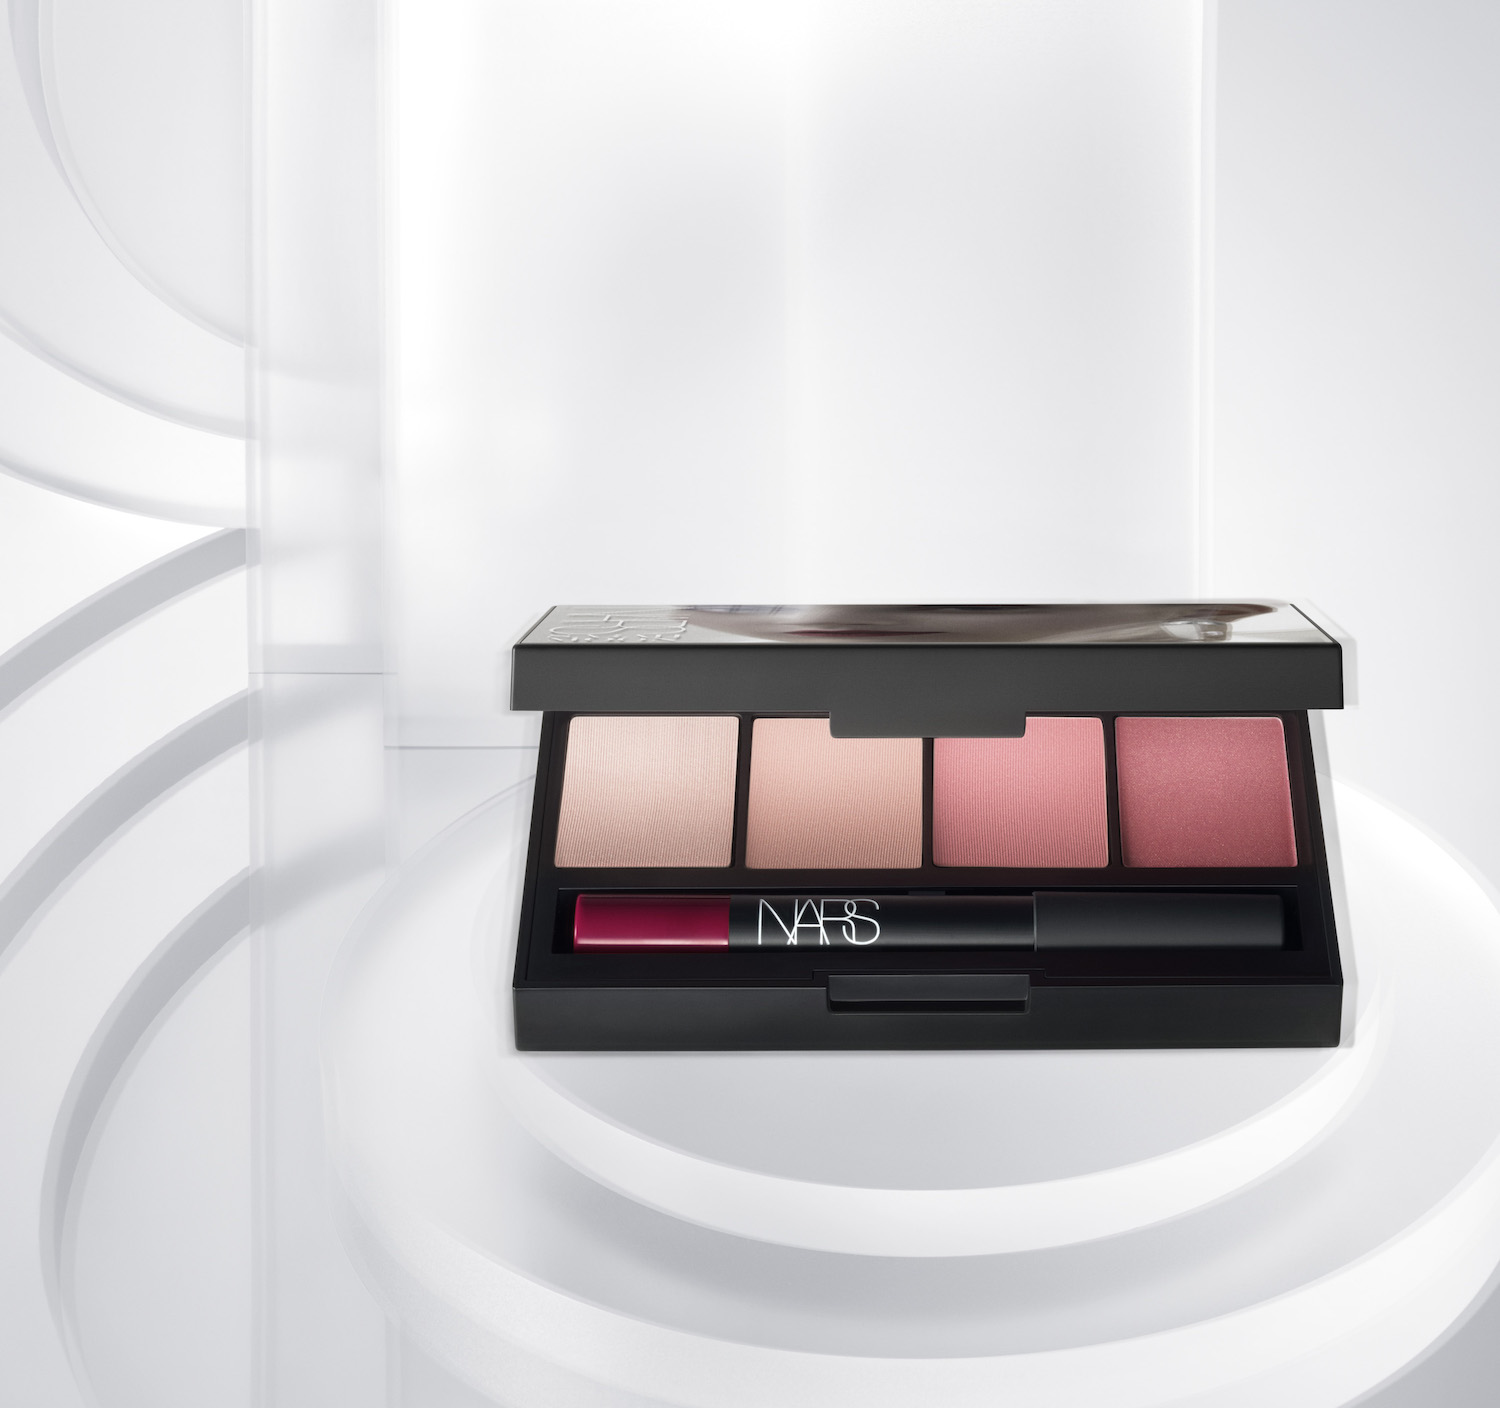 sarah-moon-for-nars-holiday-collection-5